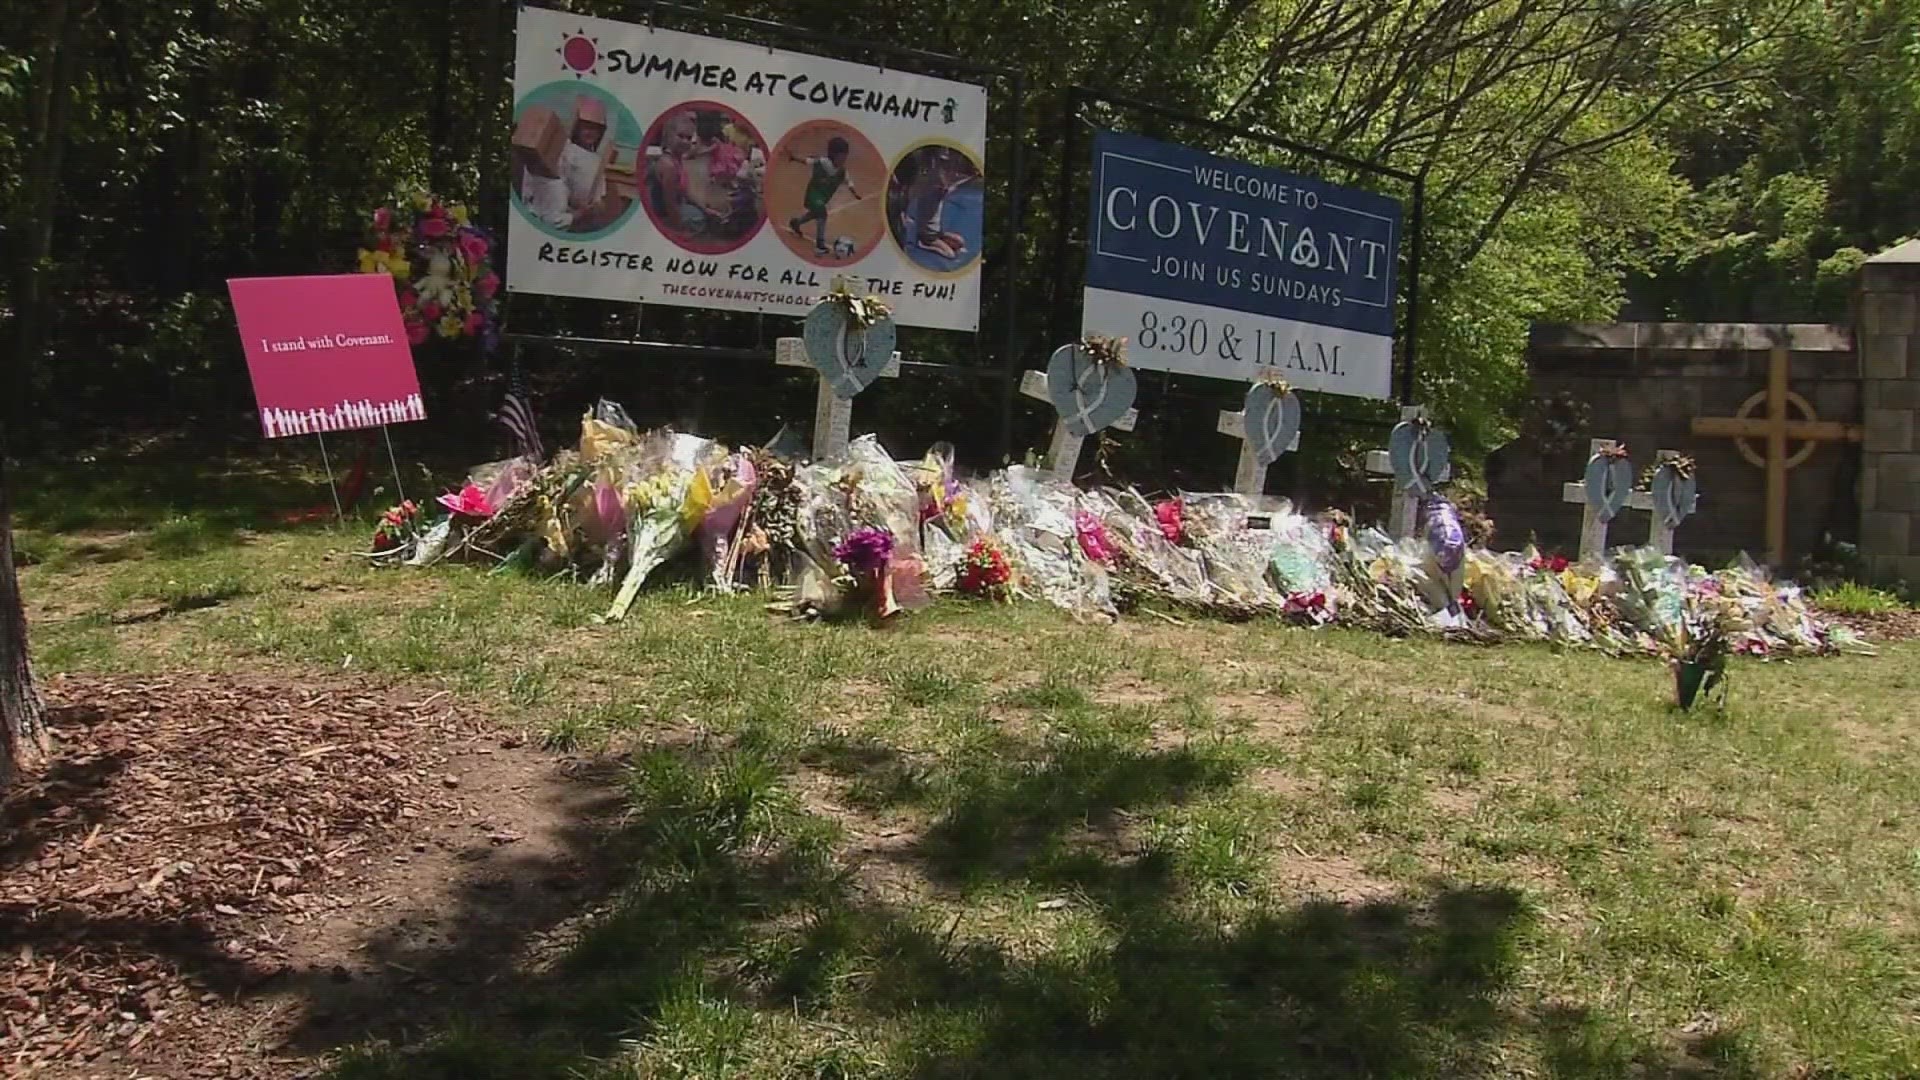 On March 27, 2023, three children and three adults were killed by a school shooter at The Covenant School in Nashville.